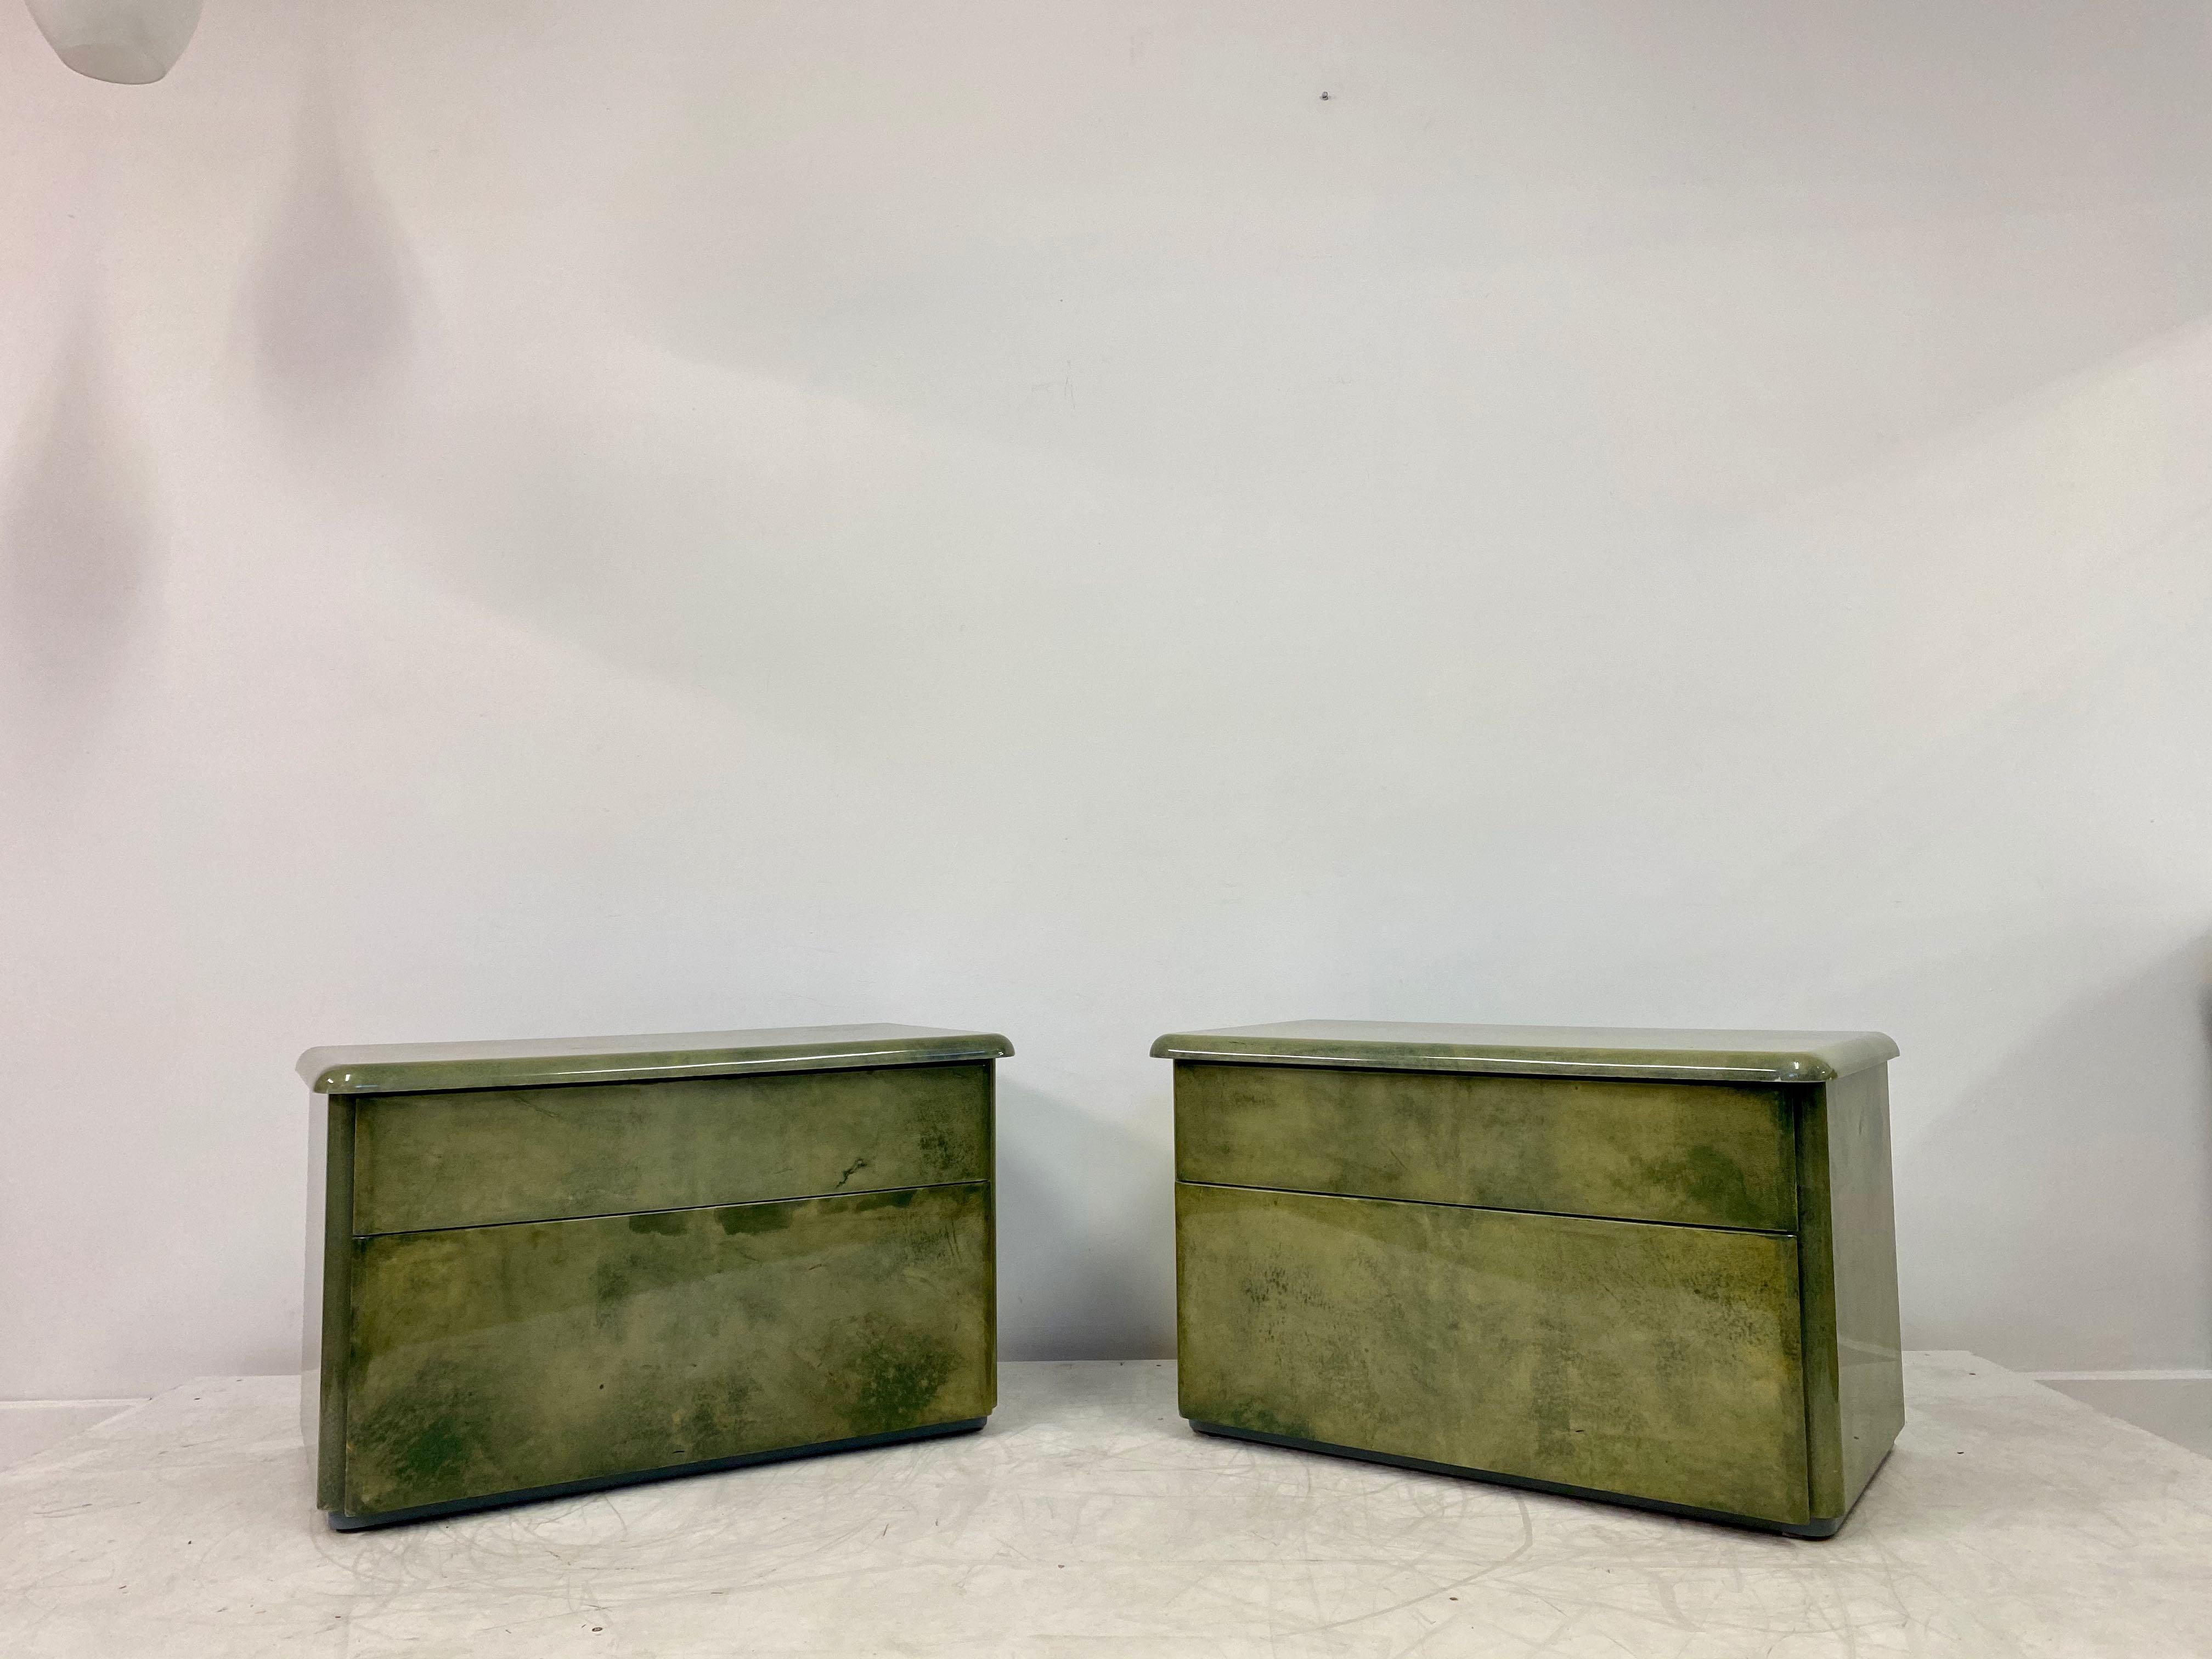 Pair of 1980s Lacquered Parchment or Goatskin Bedside Tables or Nightstands In Good Condition In London, London